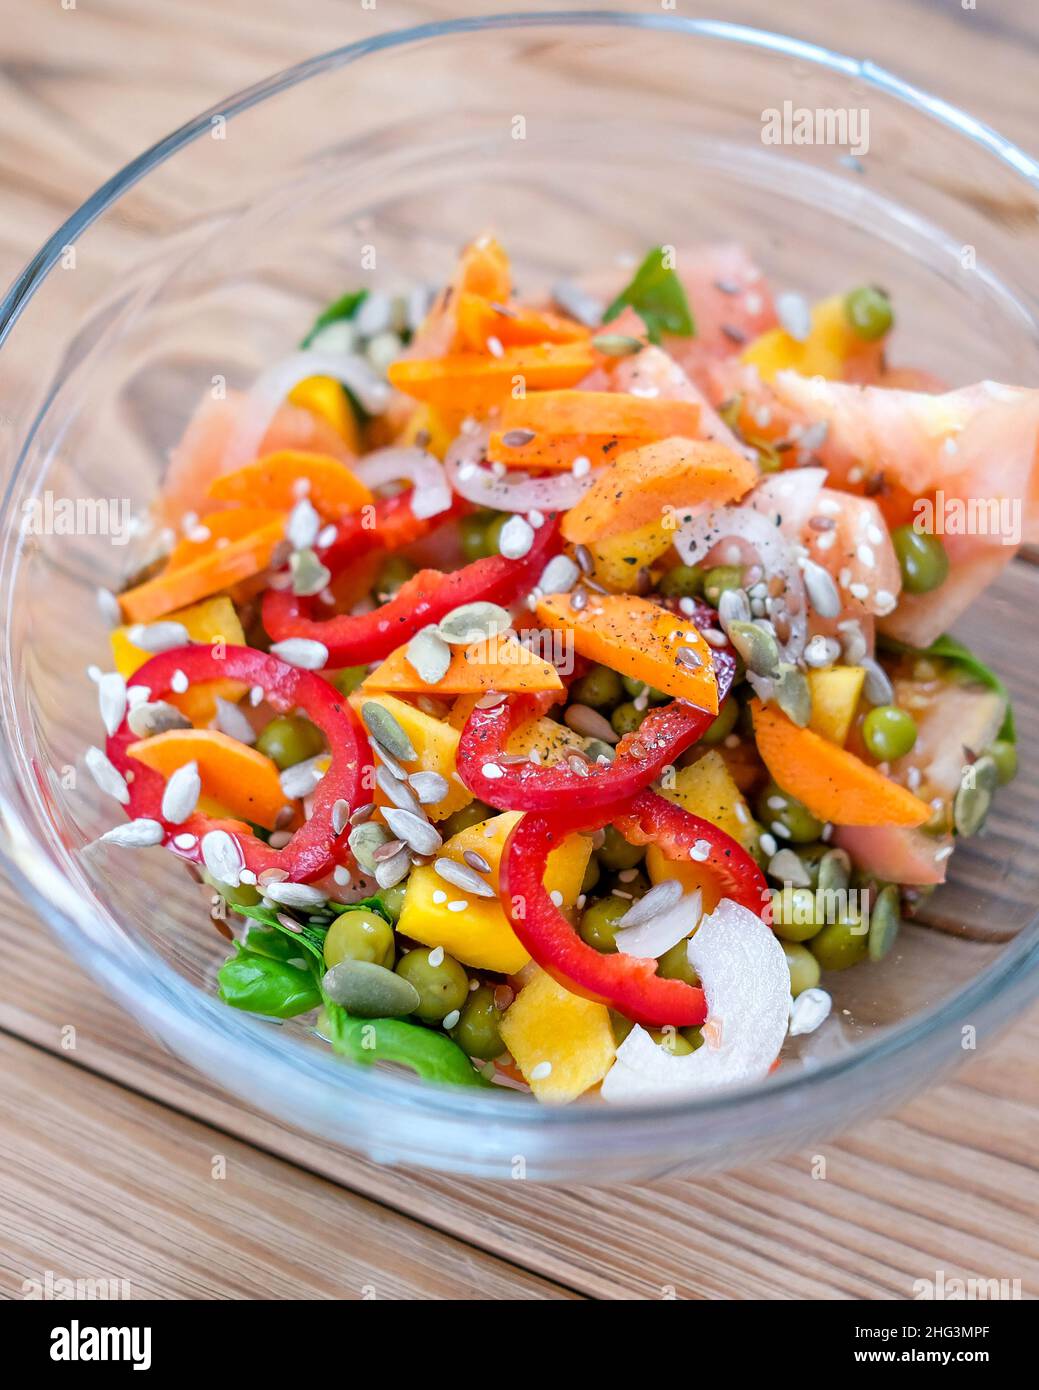 Vegetable colorful bright salad in a transparent bowl. Stock Photo